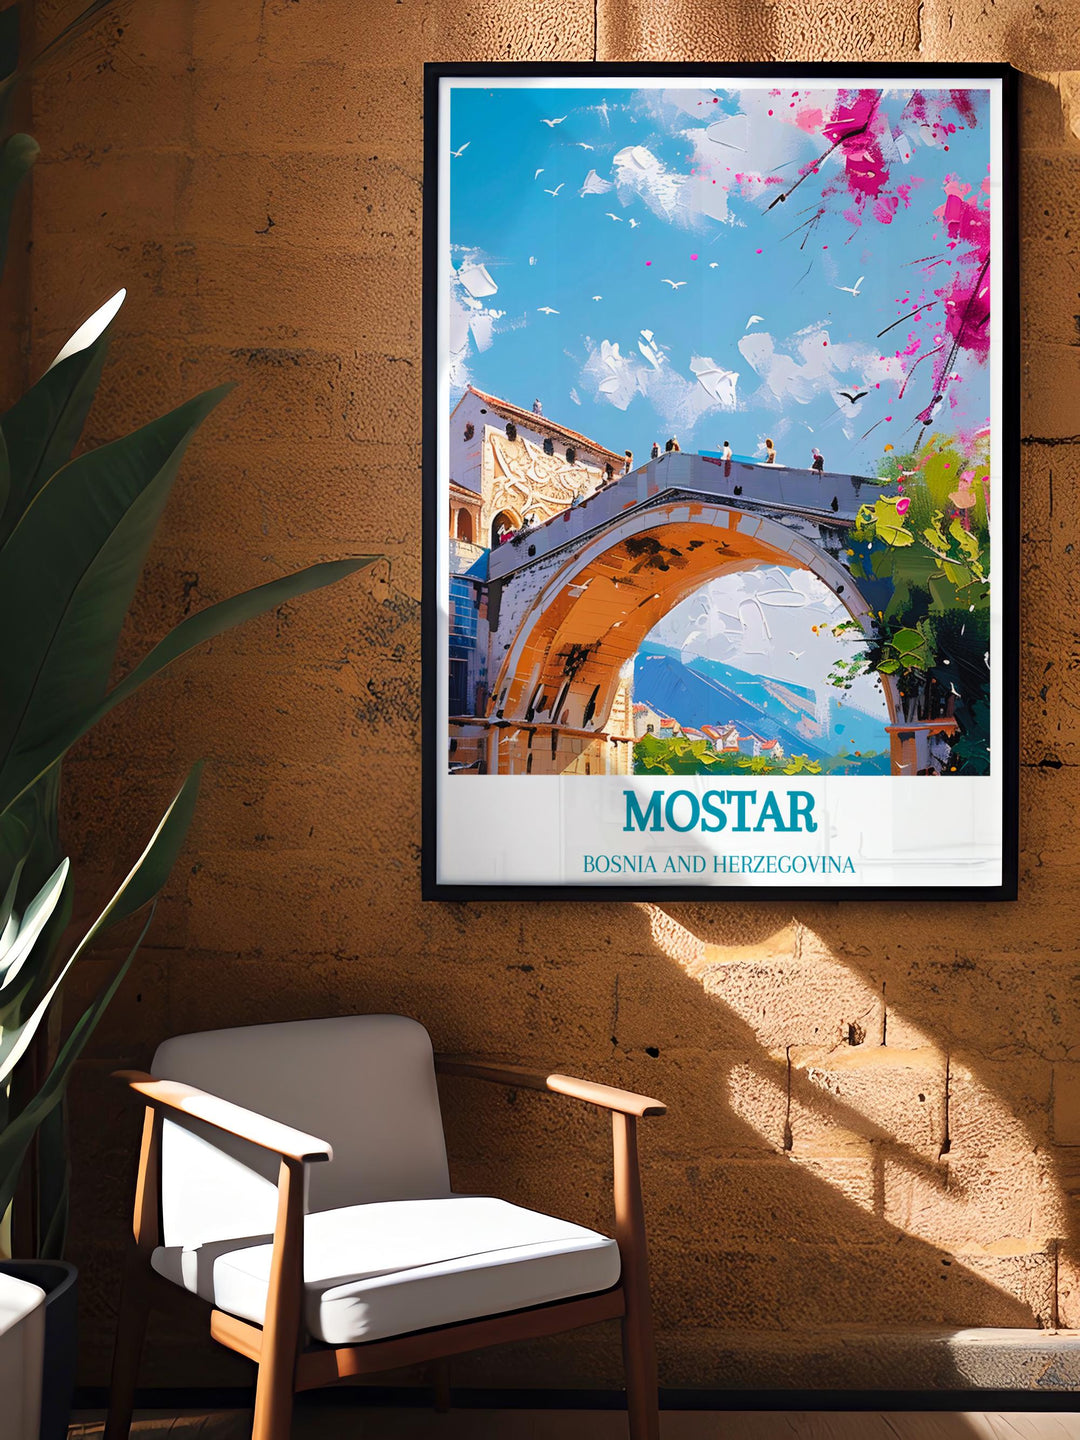 Bosnia and Herzegovina custom print focusing on the scenic beauty of the Dinaric Alps, ideal for nature lovers.